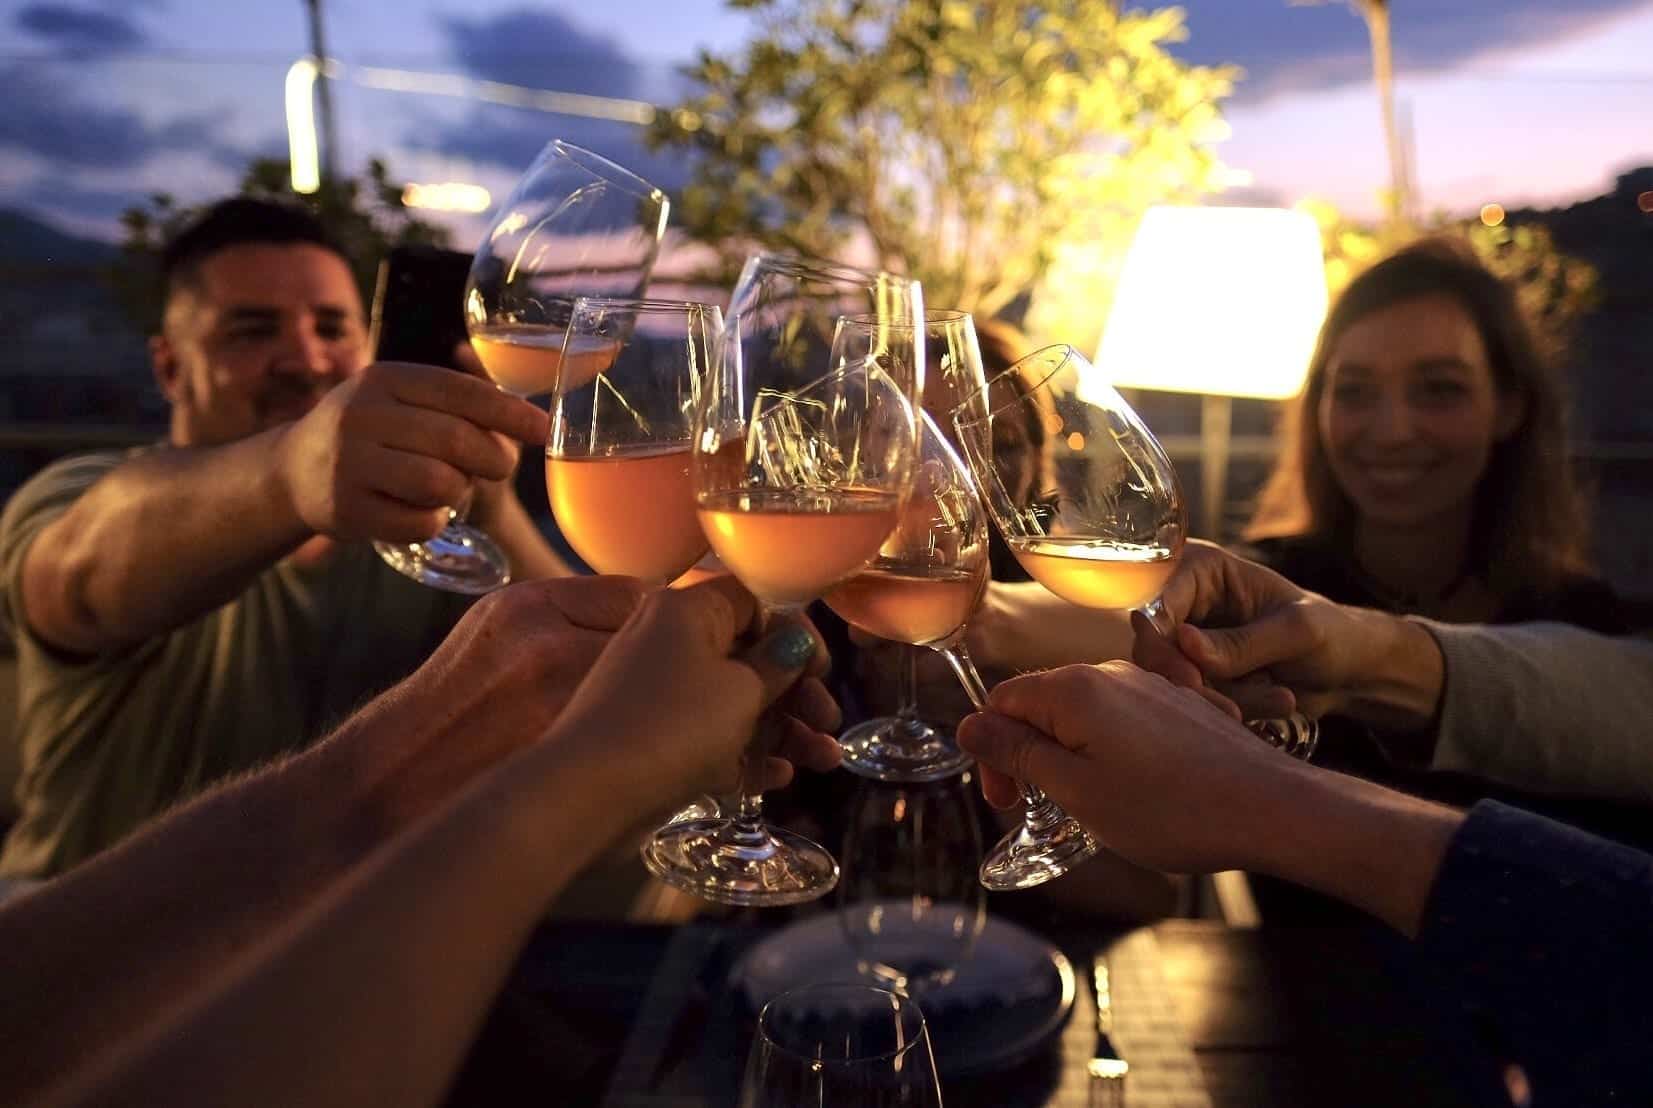 Several people toasting glasses of orange wine on a darkened rooftop at sunset.